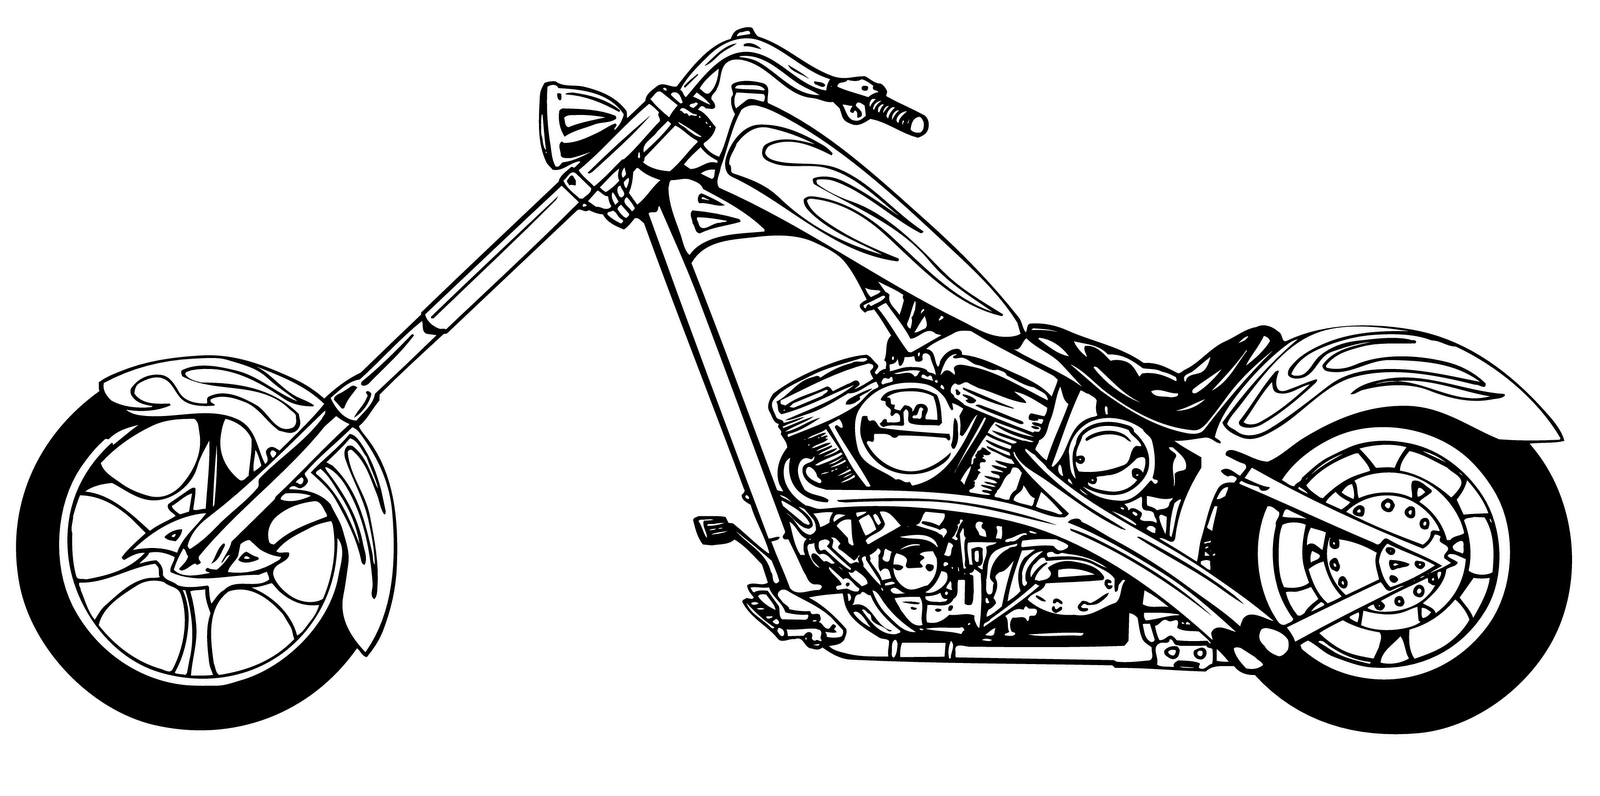 Motorcycle Chopper Clipart Hd Pictures 4 HD Wallpapers lzamgs